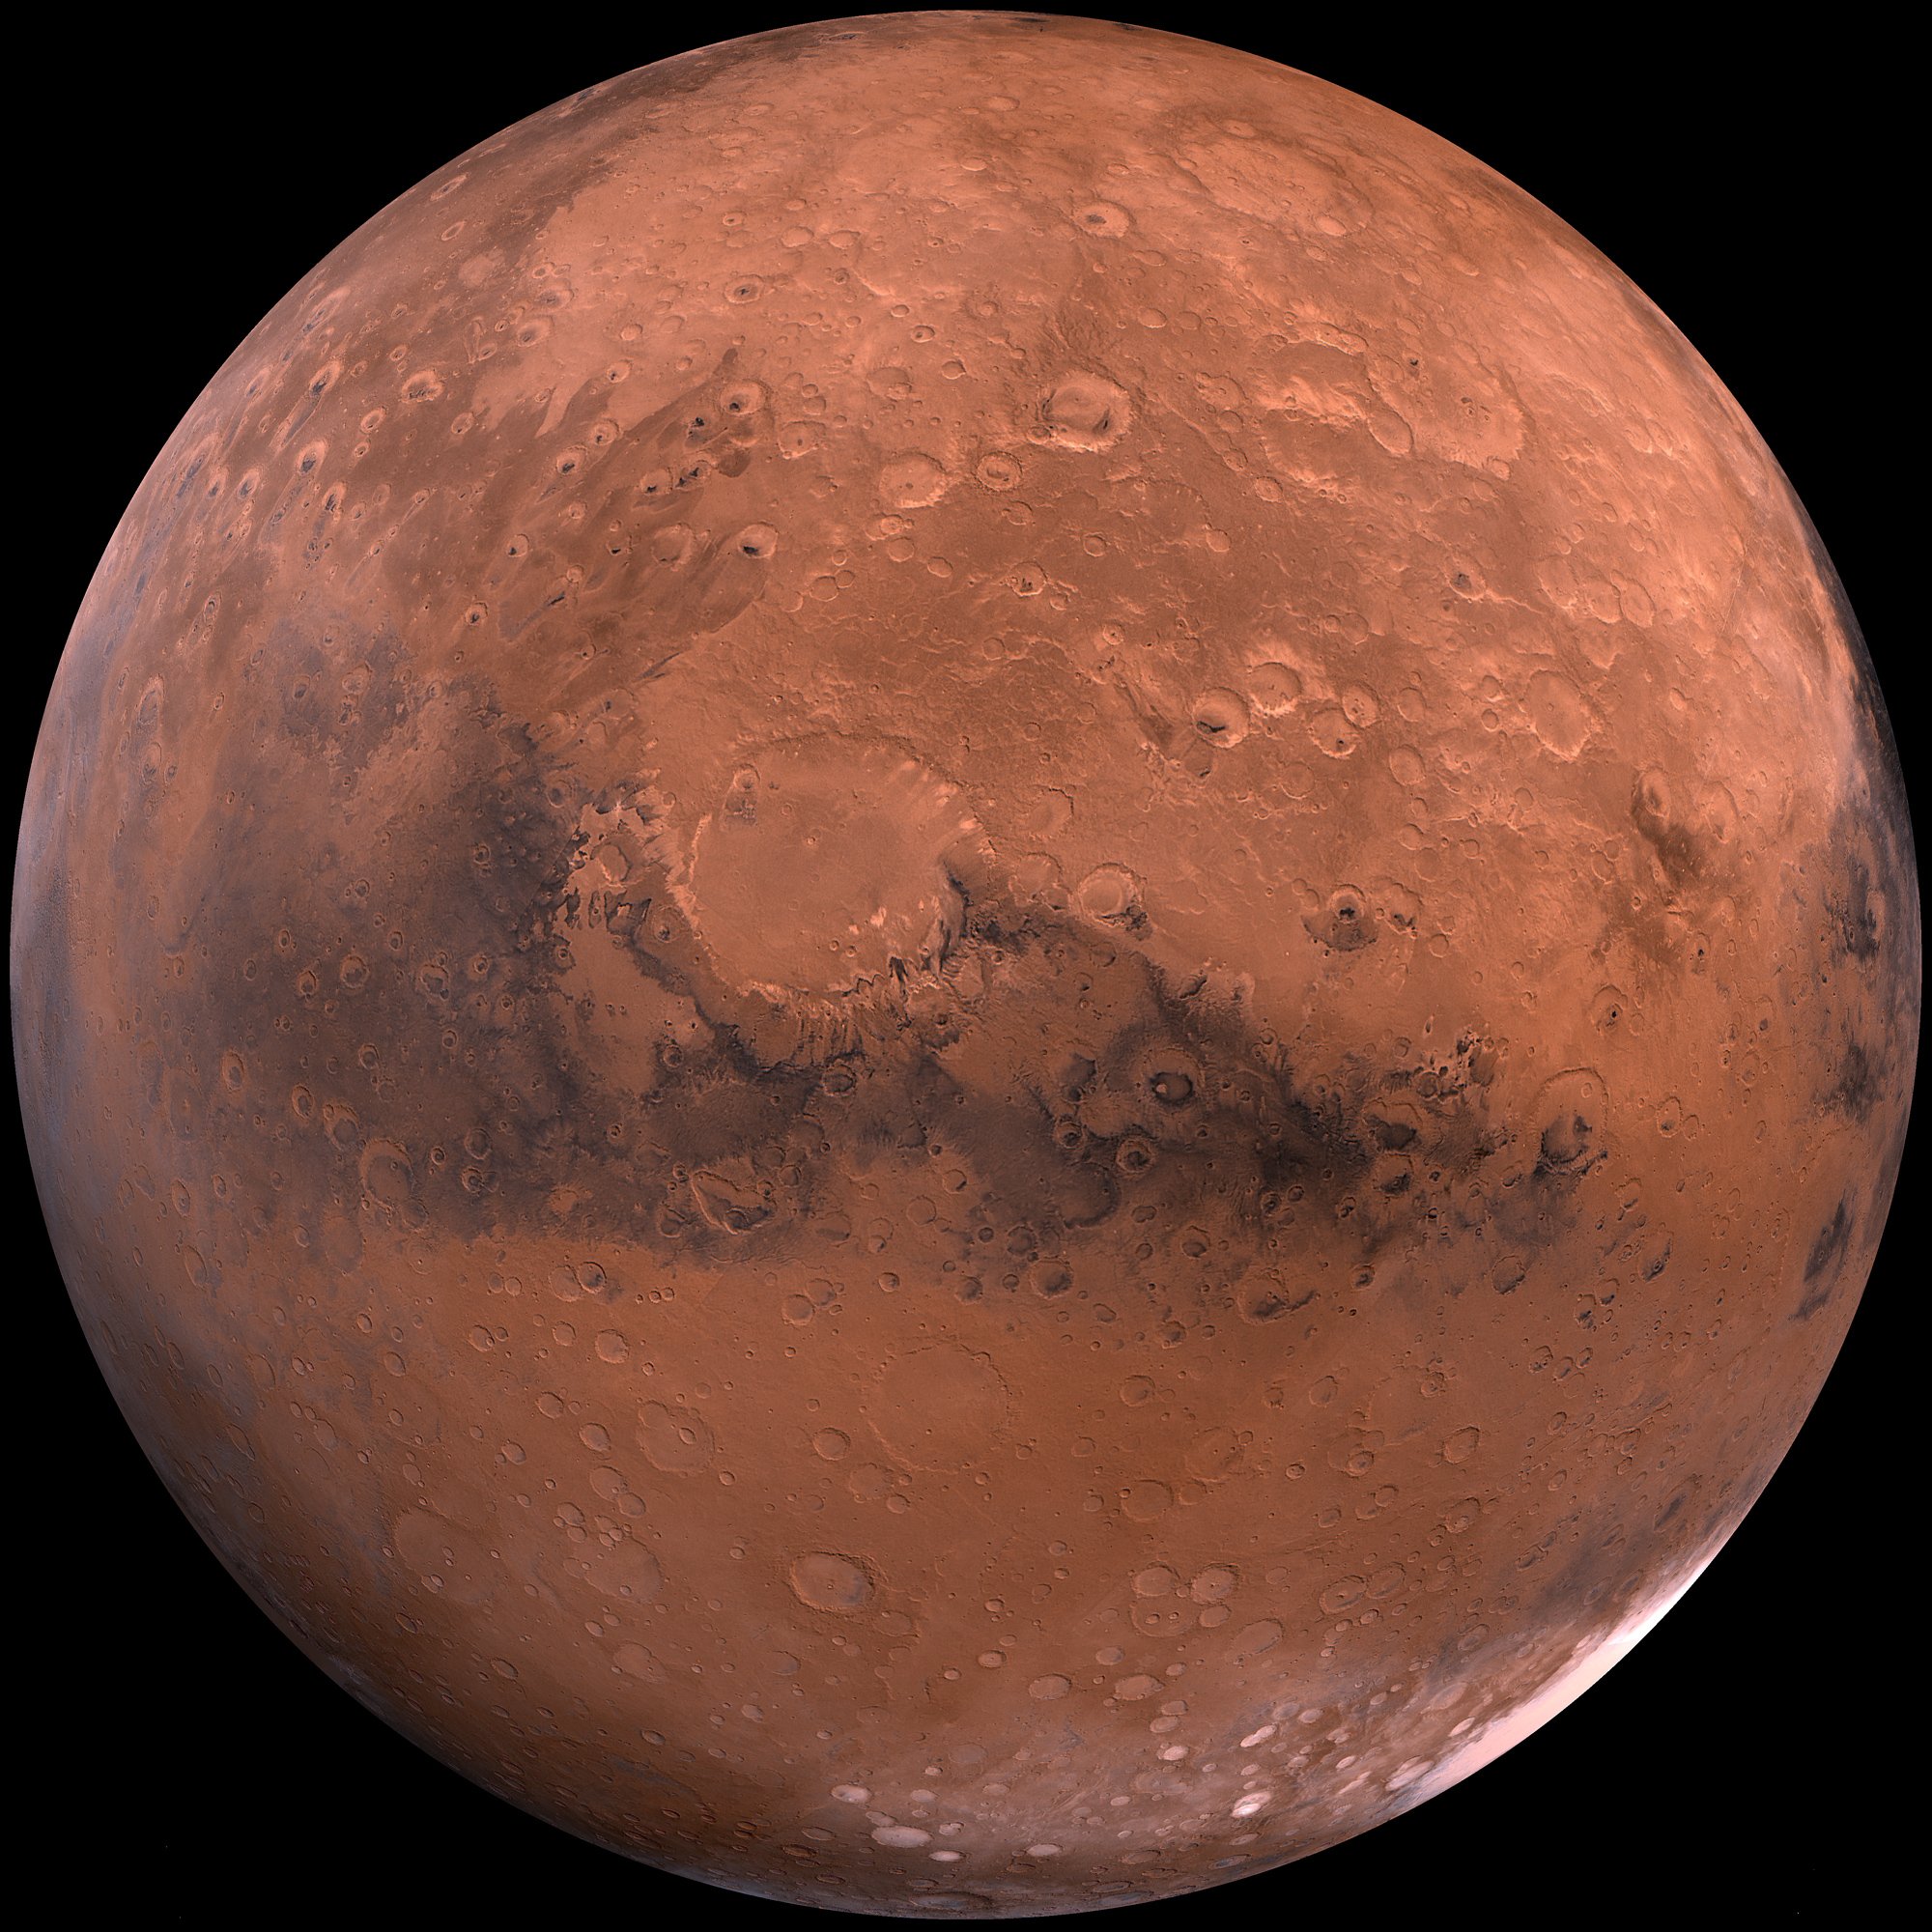 Mars from a distance.